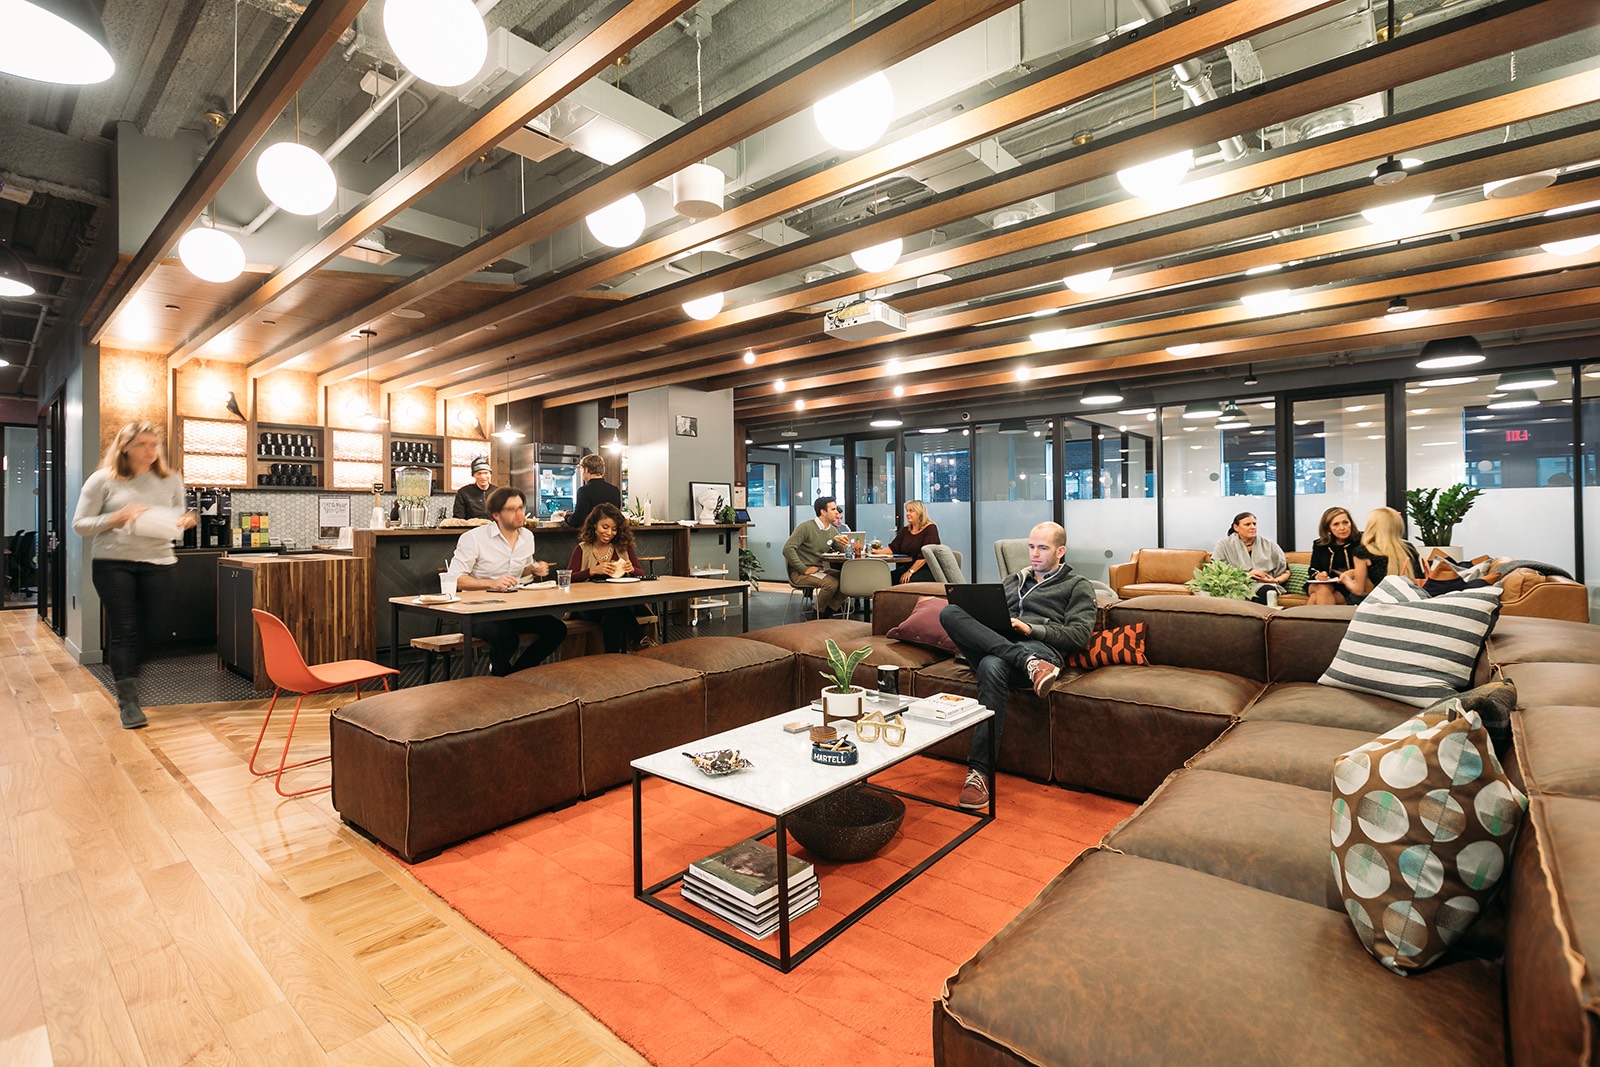 A Look Inside WeWork’s NYC Coworking Space - E 57th - Officelovin'